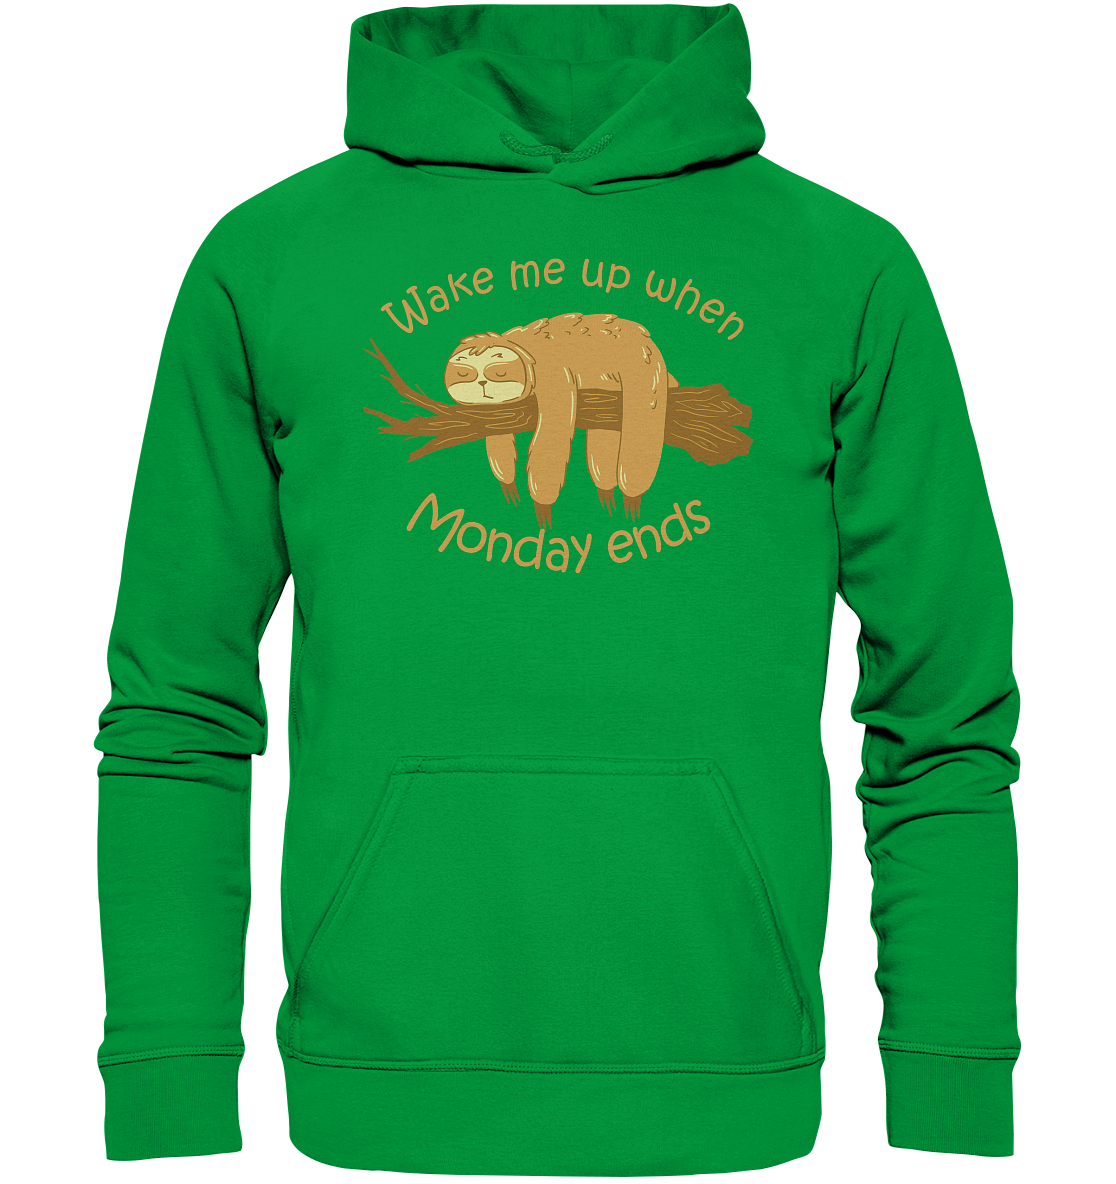 Wake me up when monday ends - Basic Unisex Hoodie